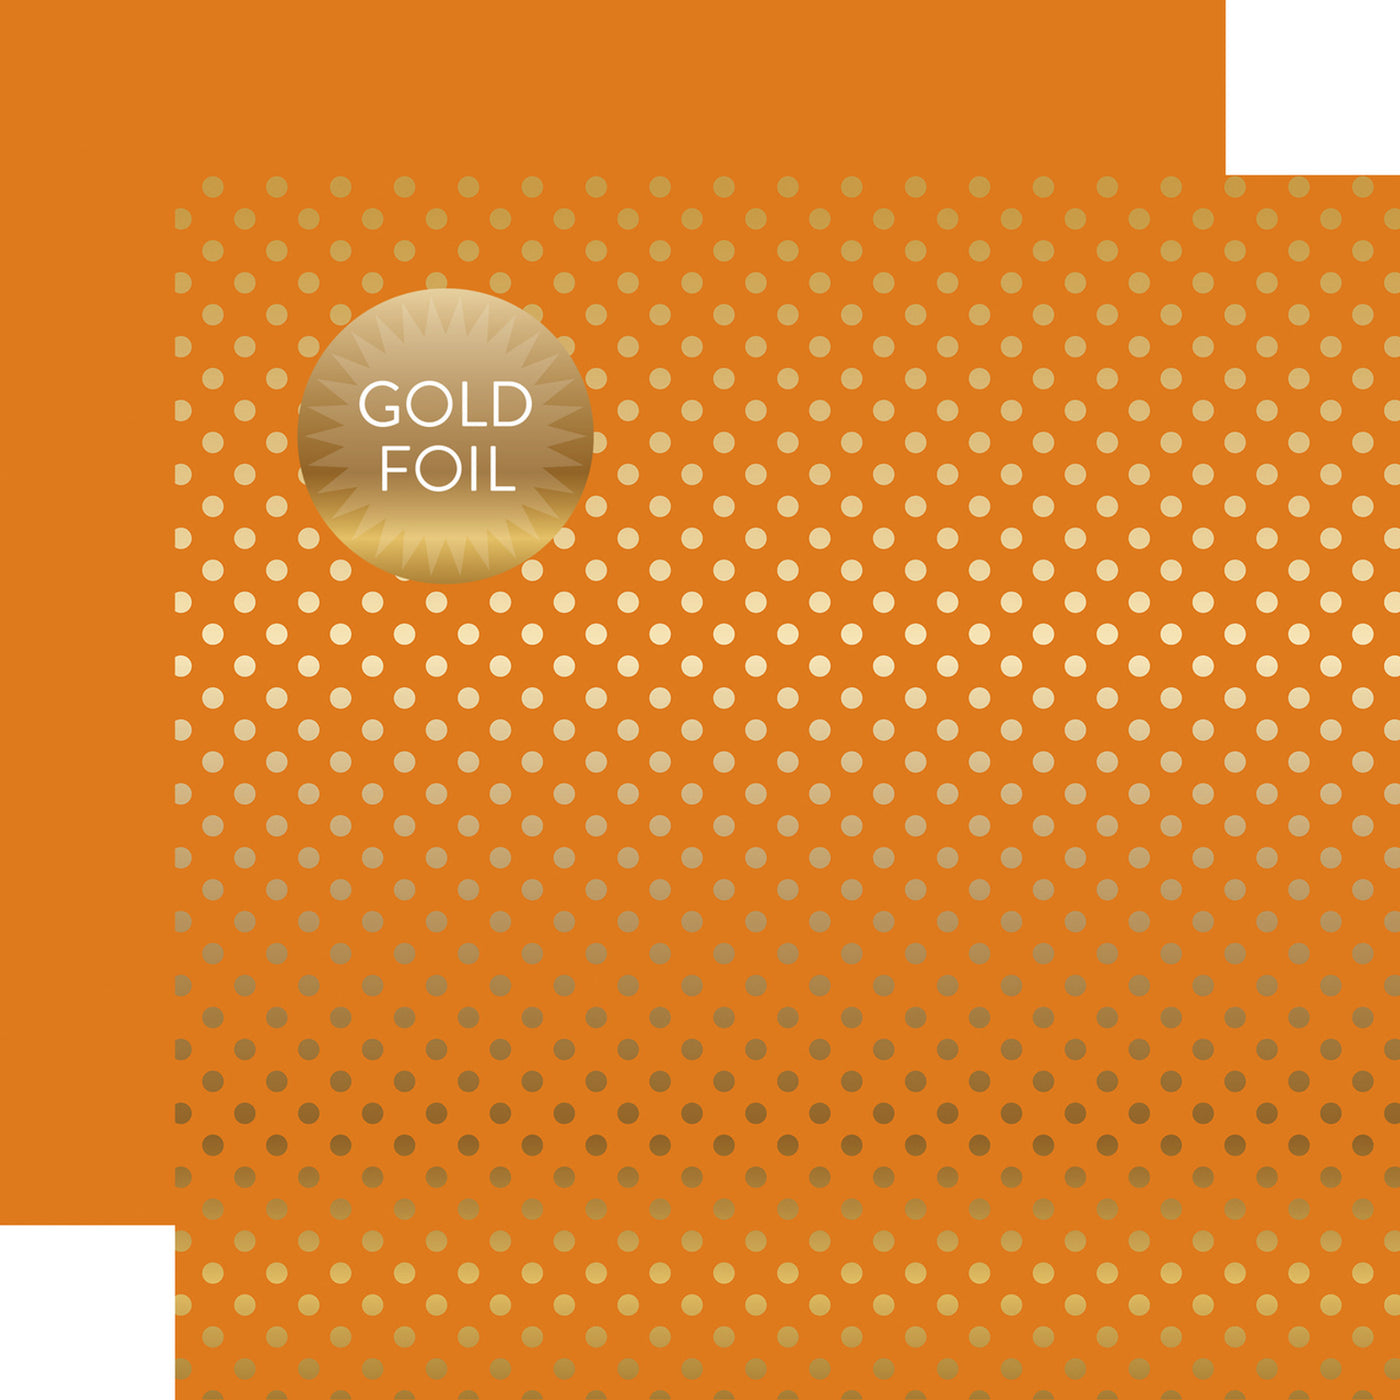 Gold foil dots on orange 12x12 cardstock, plain orange reverse, from Dots & Stripes Collection by Echo Park Paper.